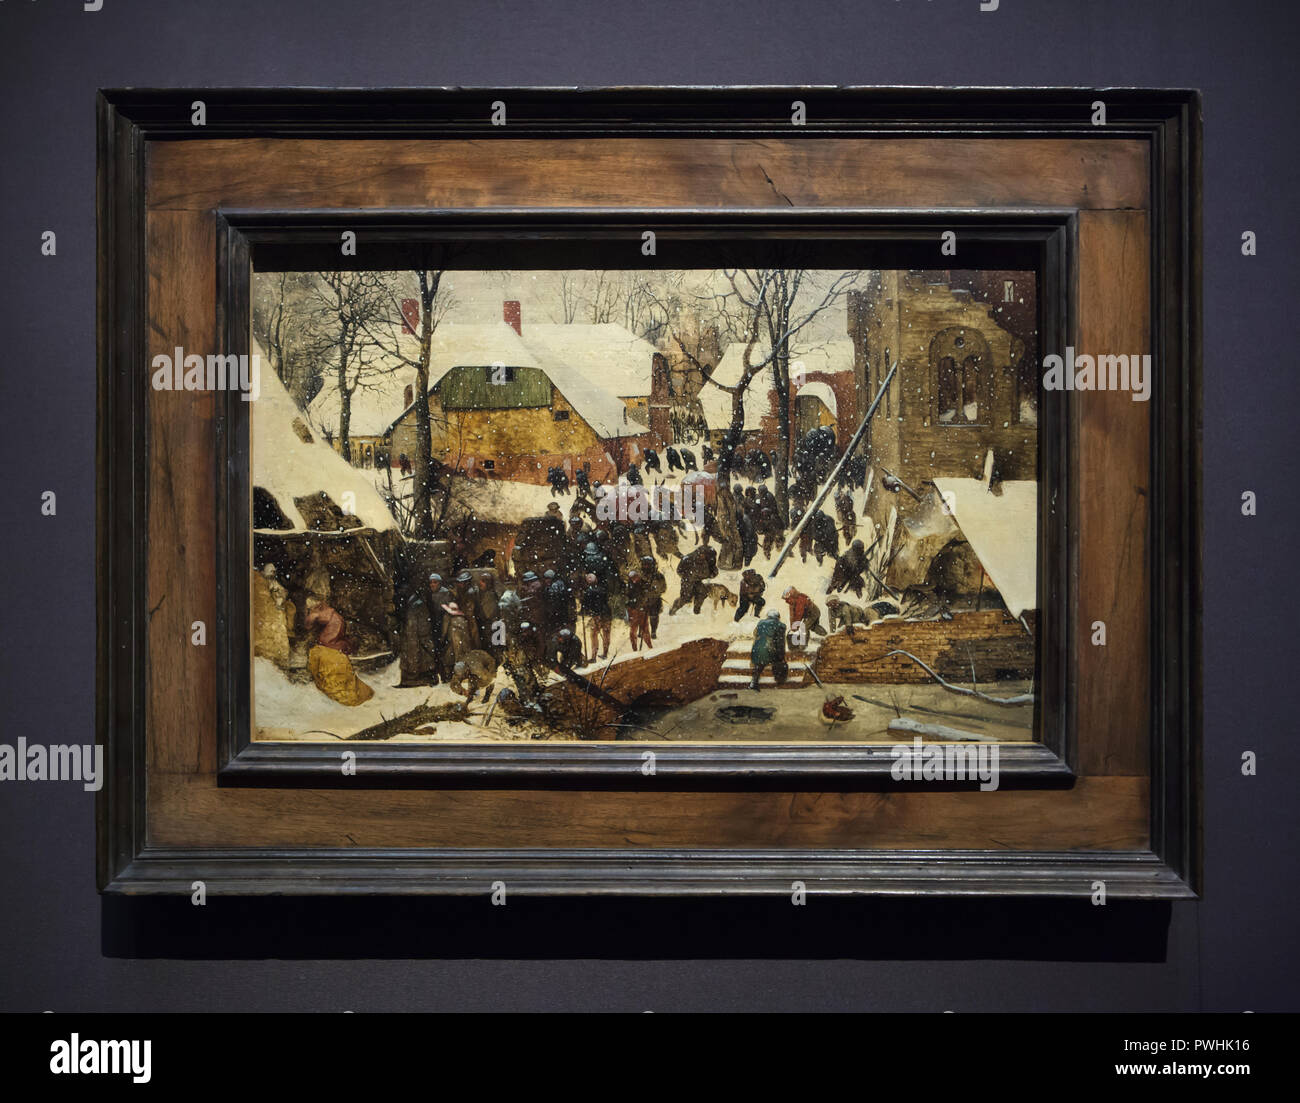 Painting 'The Adoration of the Magi in the Snow' by Dutch Renaissance painter Pieter Bruegel the Elder (1567) on display at his retrospective exhibition in the Kunsthistorisches Museum (Museum of Art History) in Vienna, Austria. The exhibition marking the 450th anniversary of the death of Pieter Bruegel the Elder runs till 13 January 2019. Stock Photo